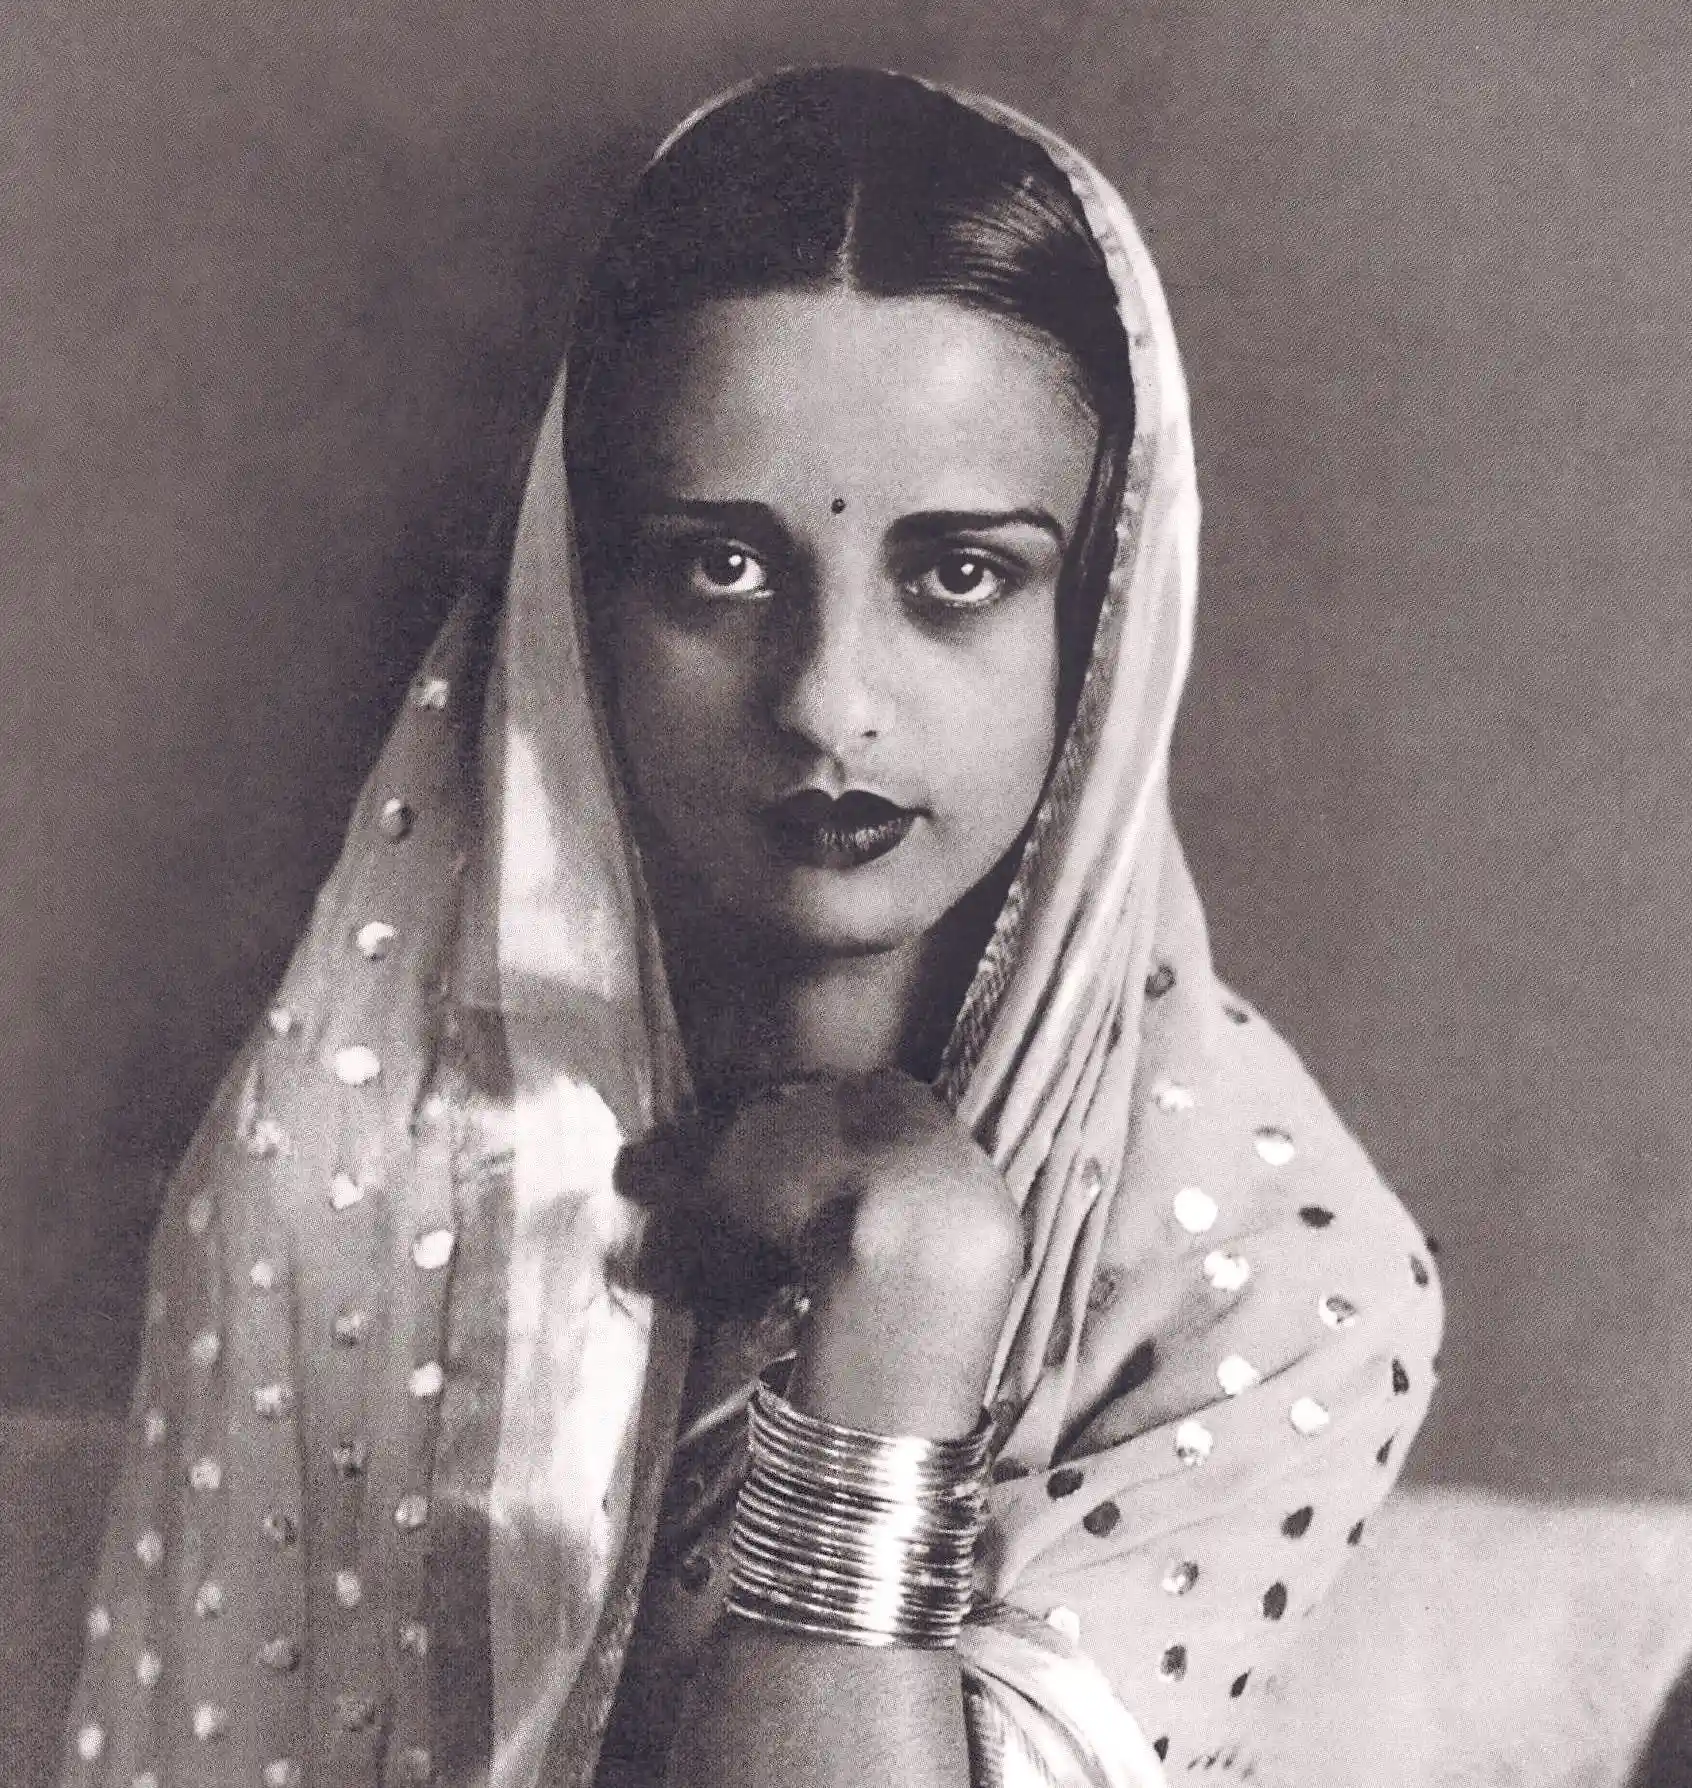 One of a kind, she left her legacy behind- Amrita Shergill. Image source: Wikimedia Commons